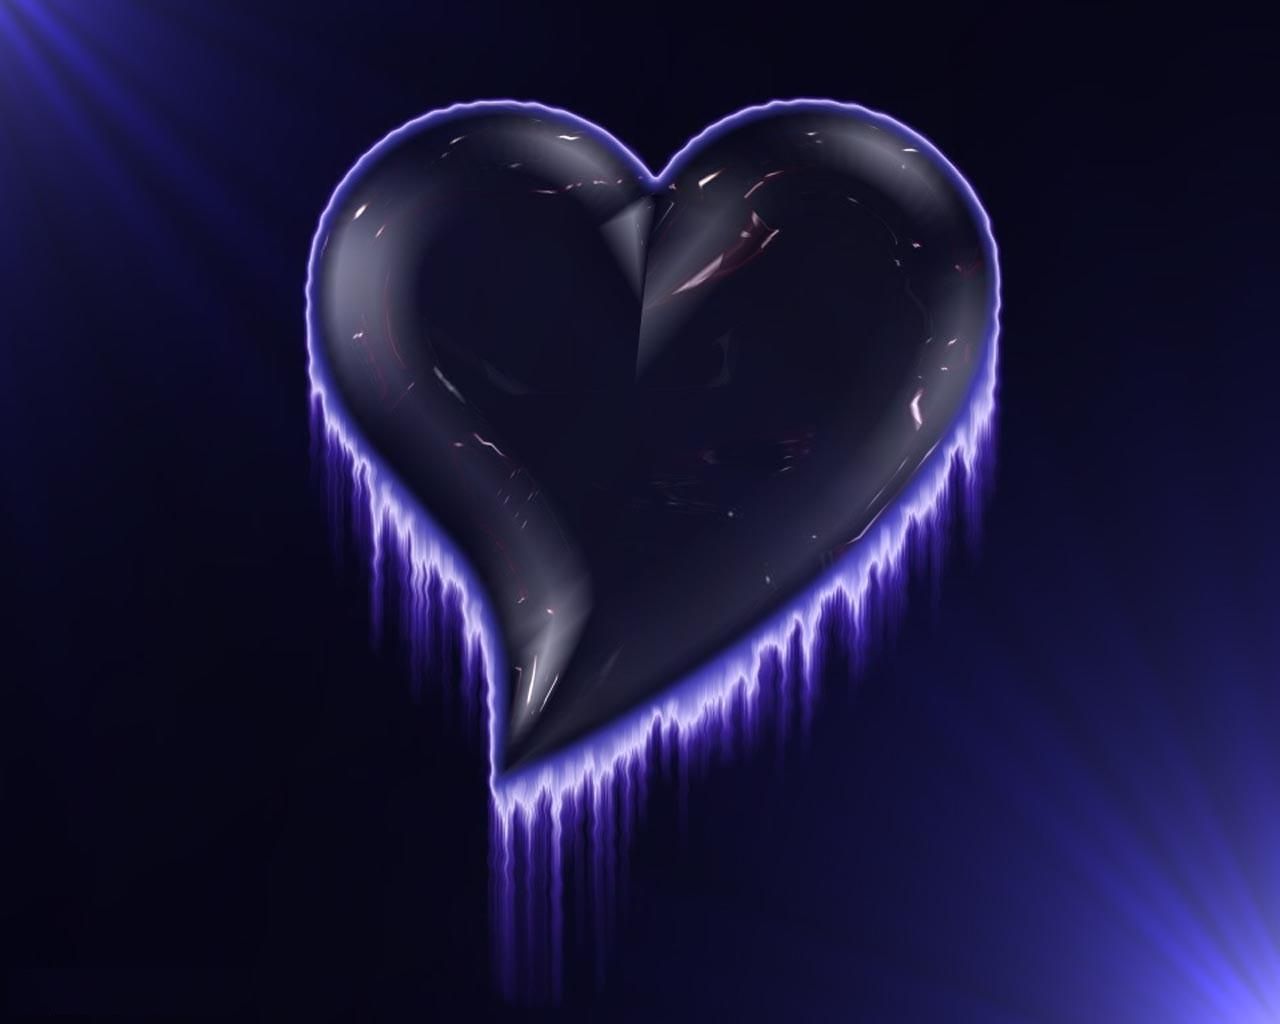 Love & Heart Archives - All Cool Wallpapers